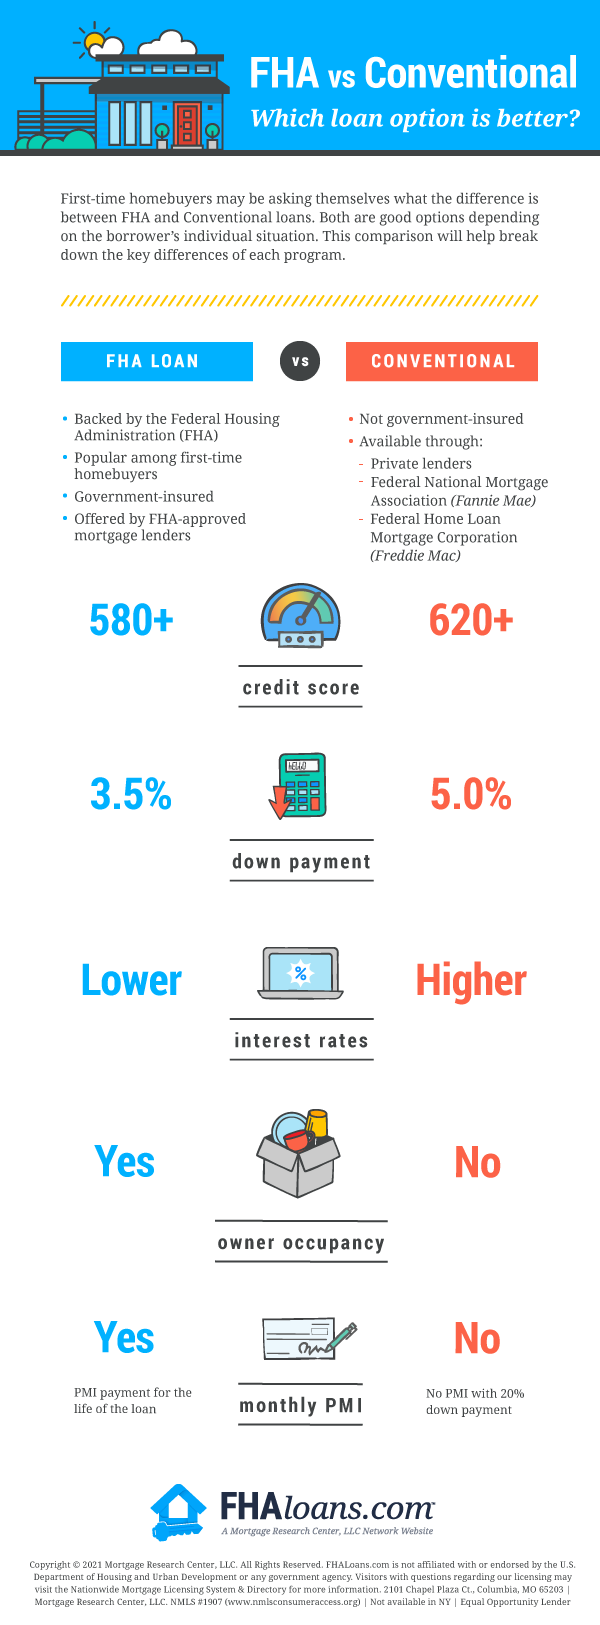 fha vs conventional loan infographic